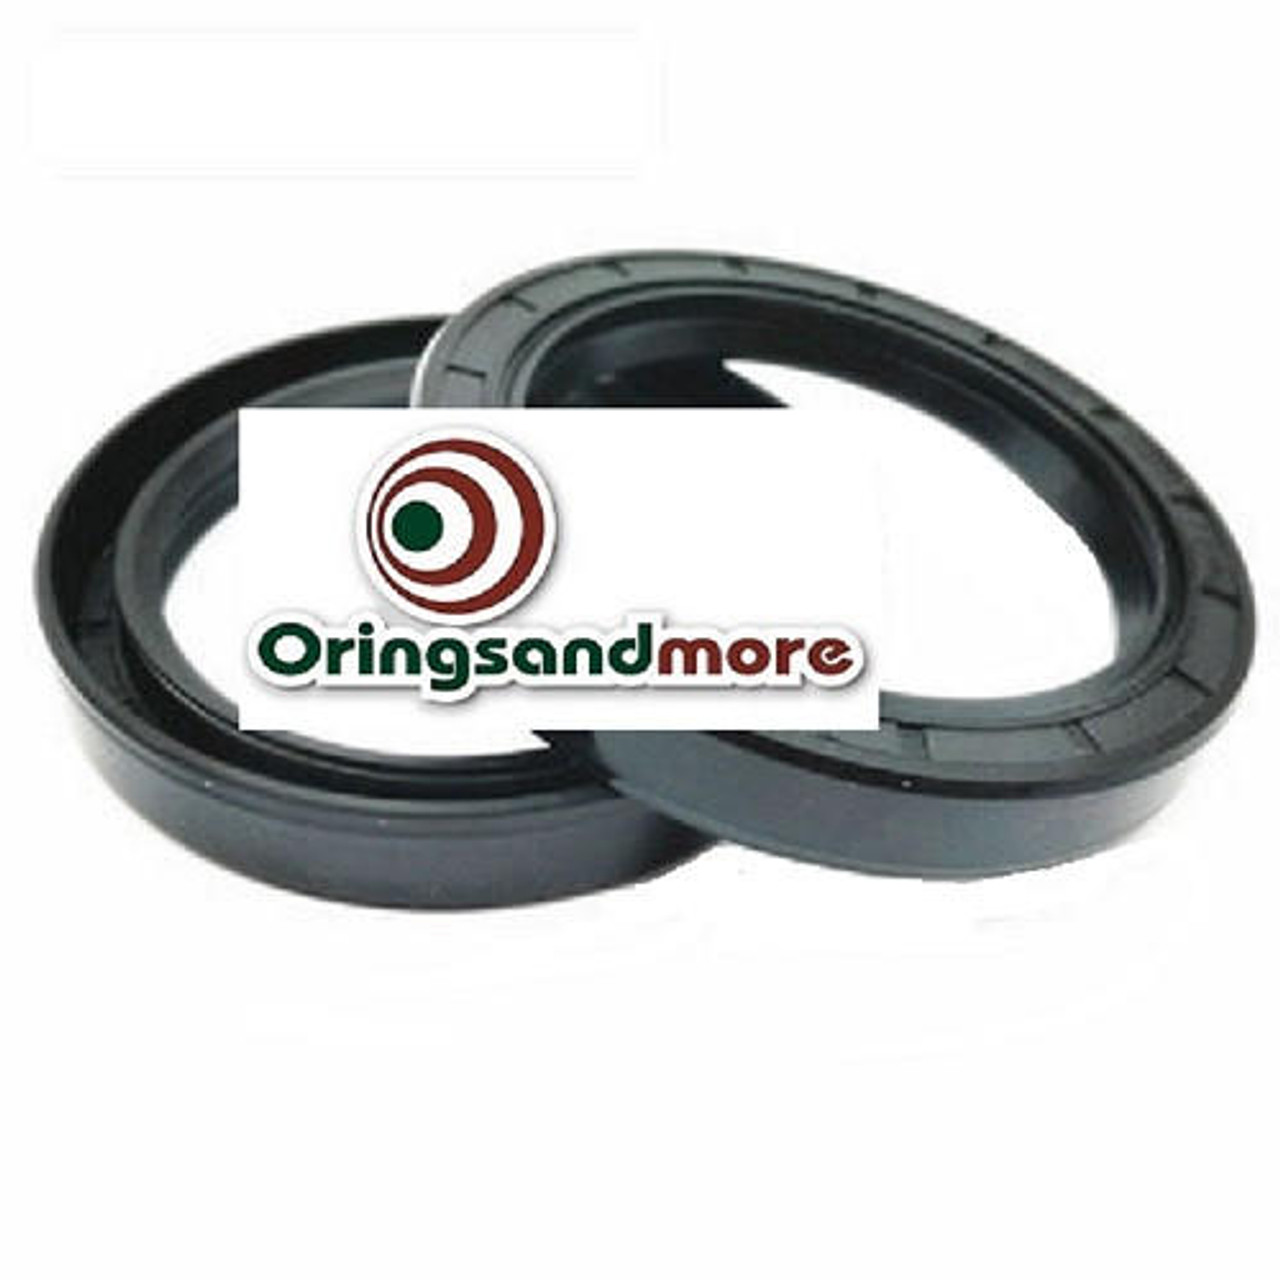 Metric Oil Shaft Seal 125 x 150 x 13mm Double Lip   Price for 1 pc